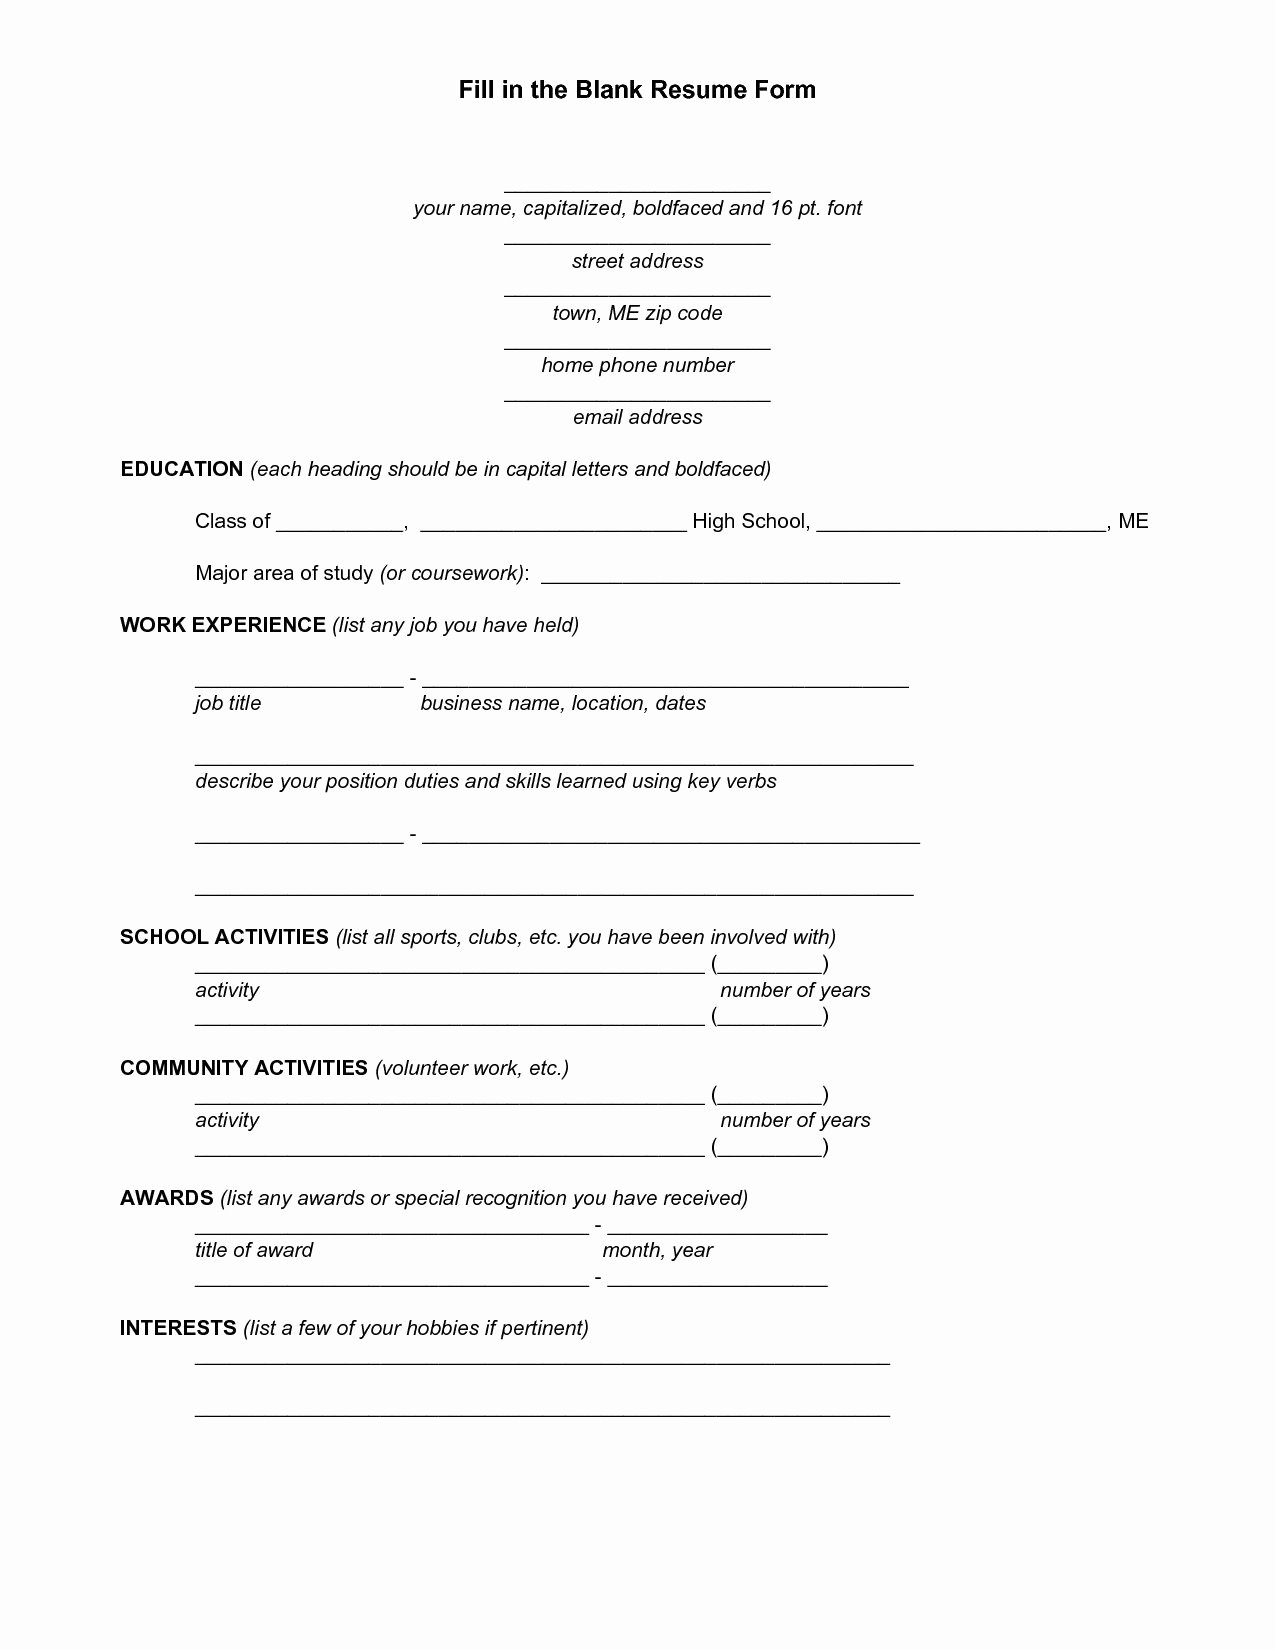 Blank Resume Template Pdf Beautiful Blank Job Resume form We Provide as Reference to Make